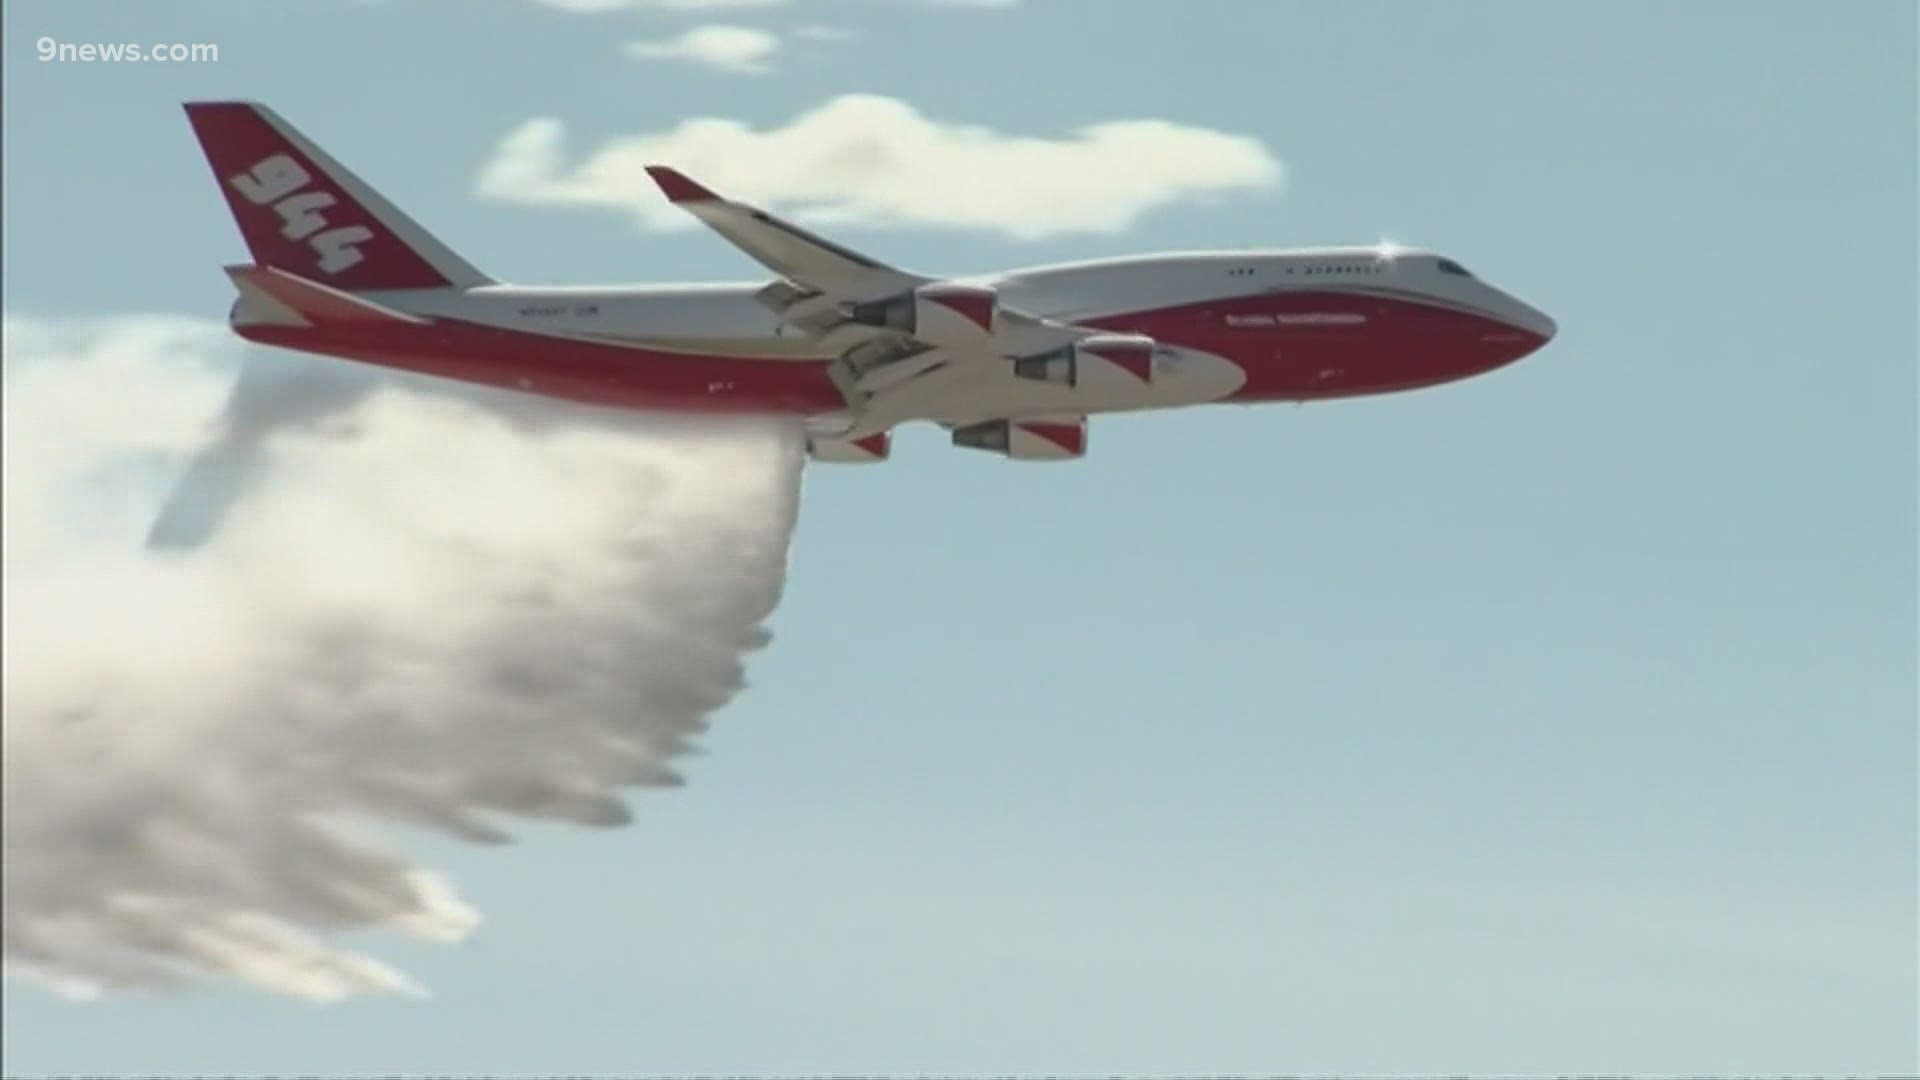 The Global SuperTanker is being shut down ahead what could be an above-average fire season.